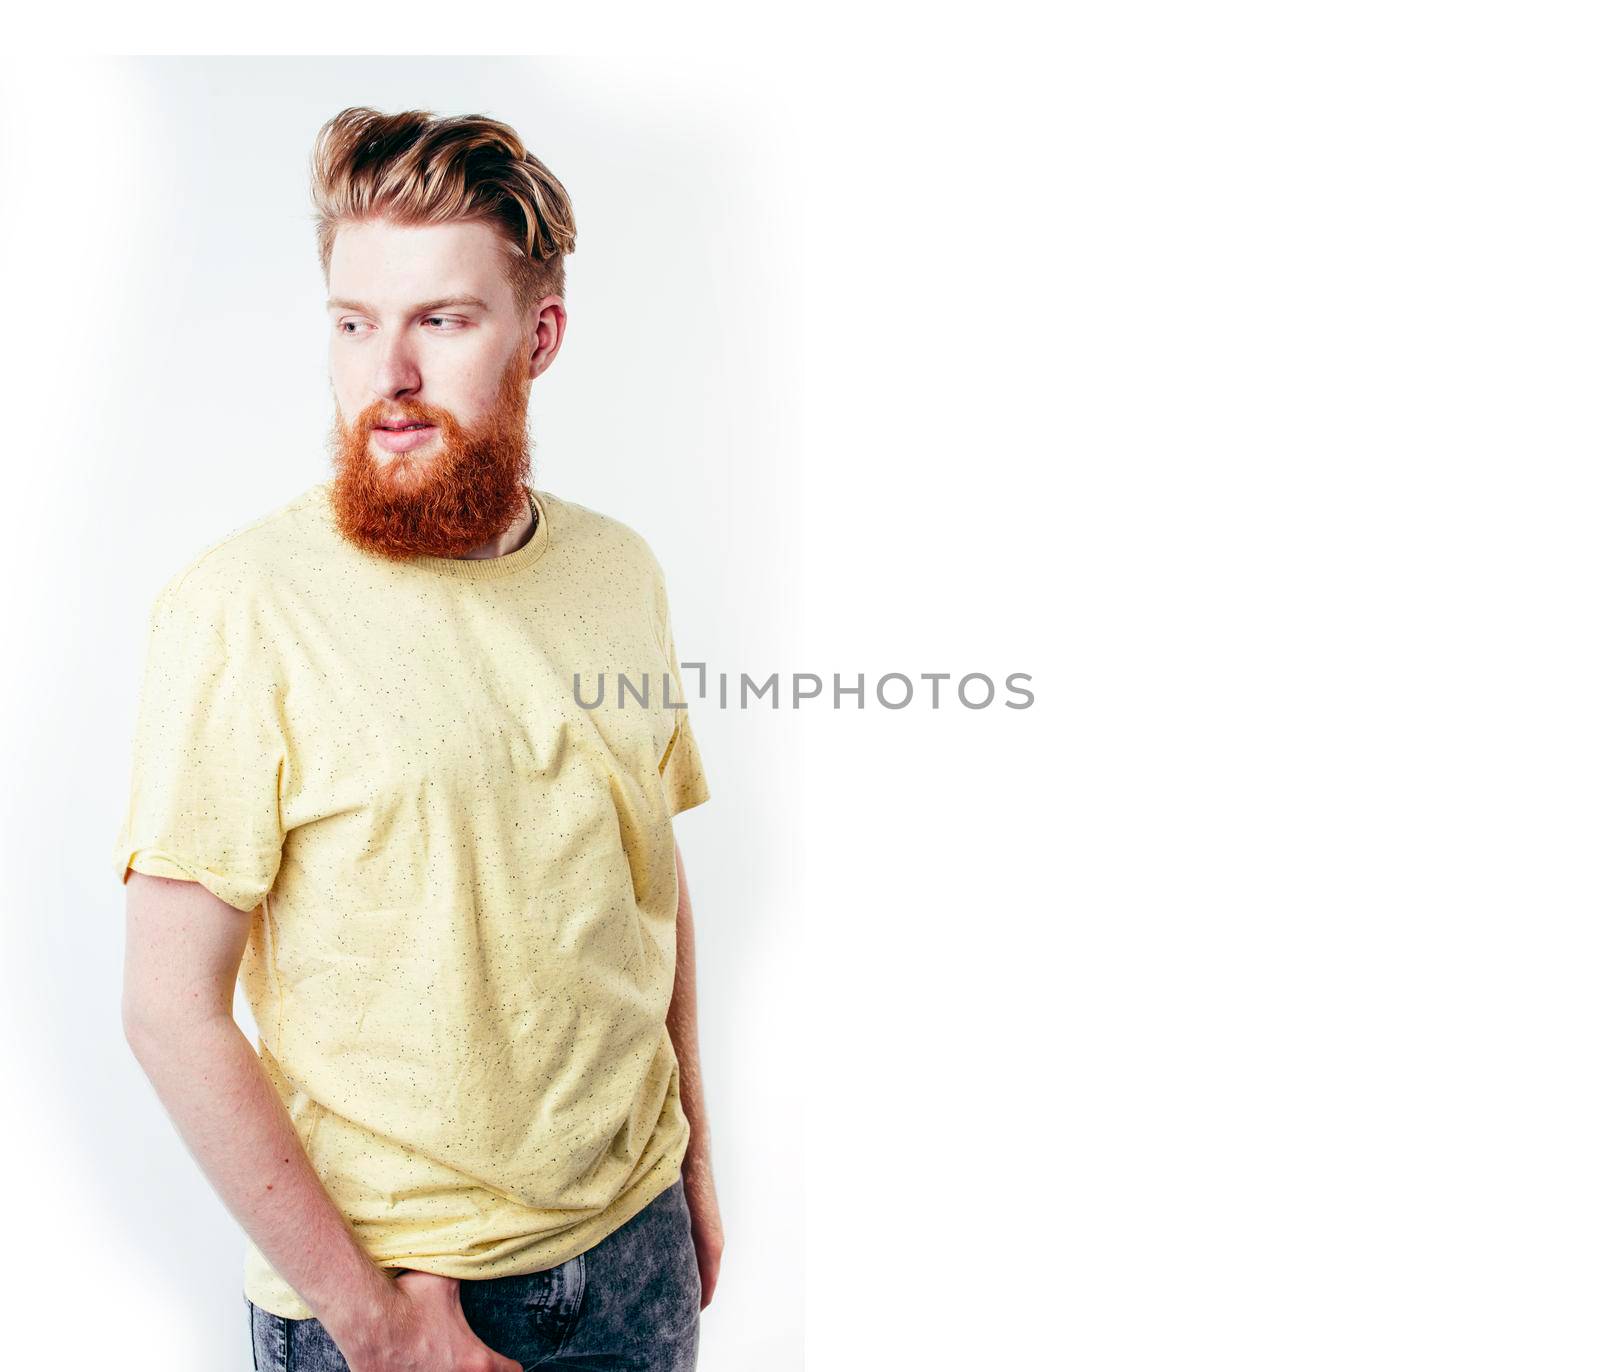 young handsome hipster ginger bearded guy looking brutal isolated on white background, lifestyle people concept close up